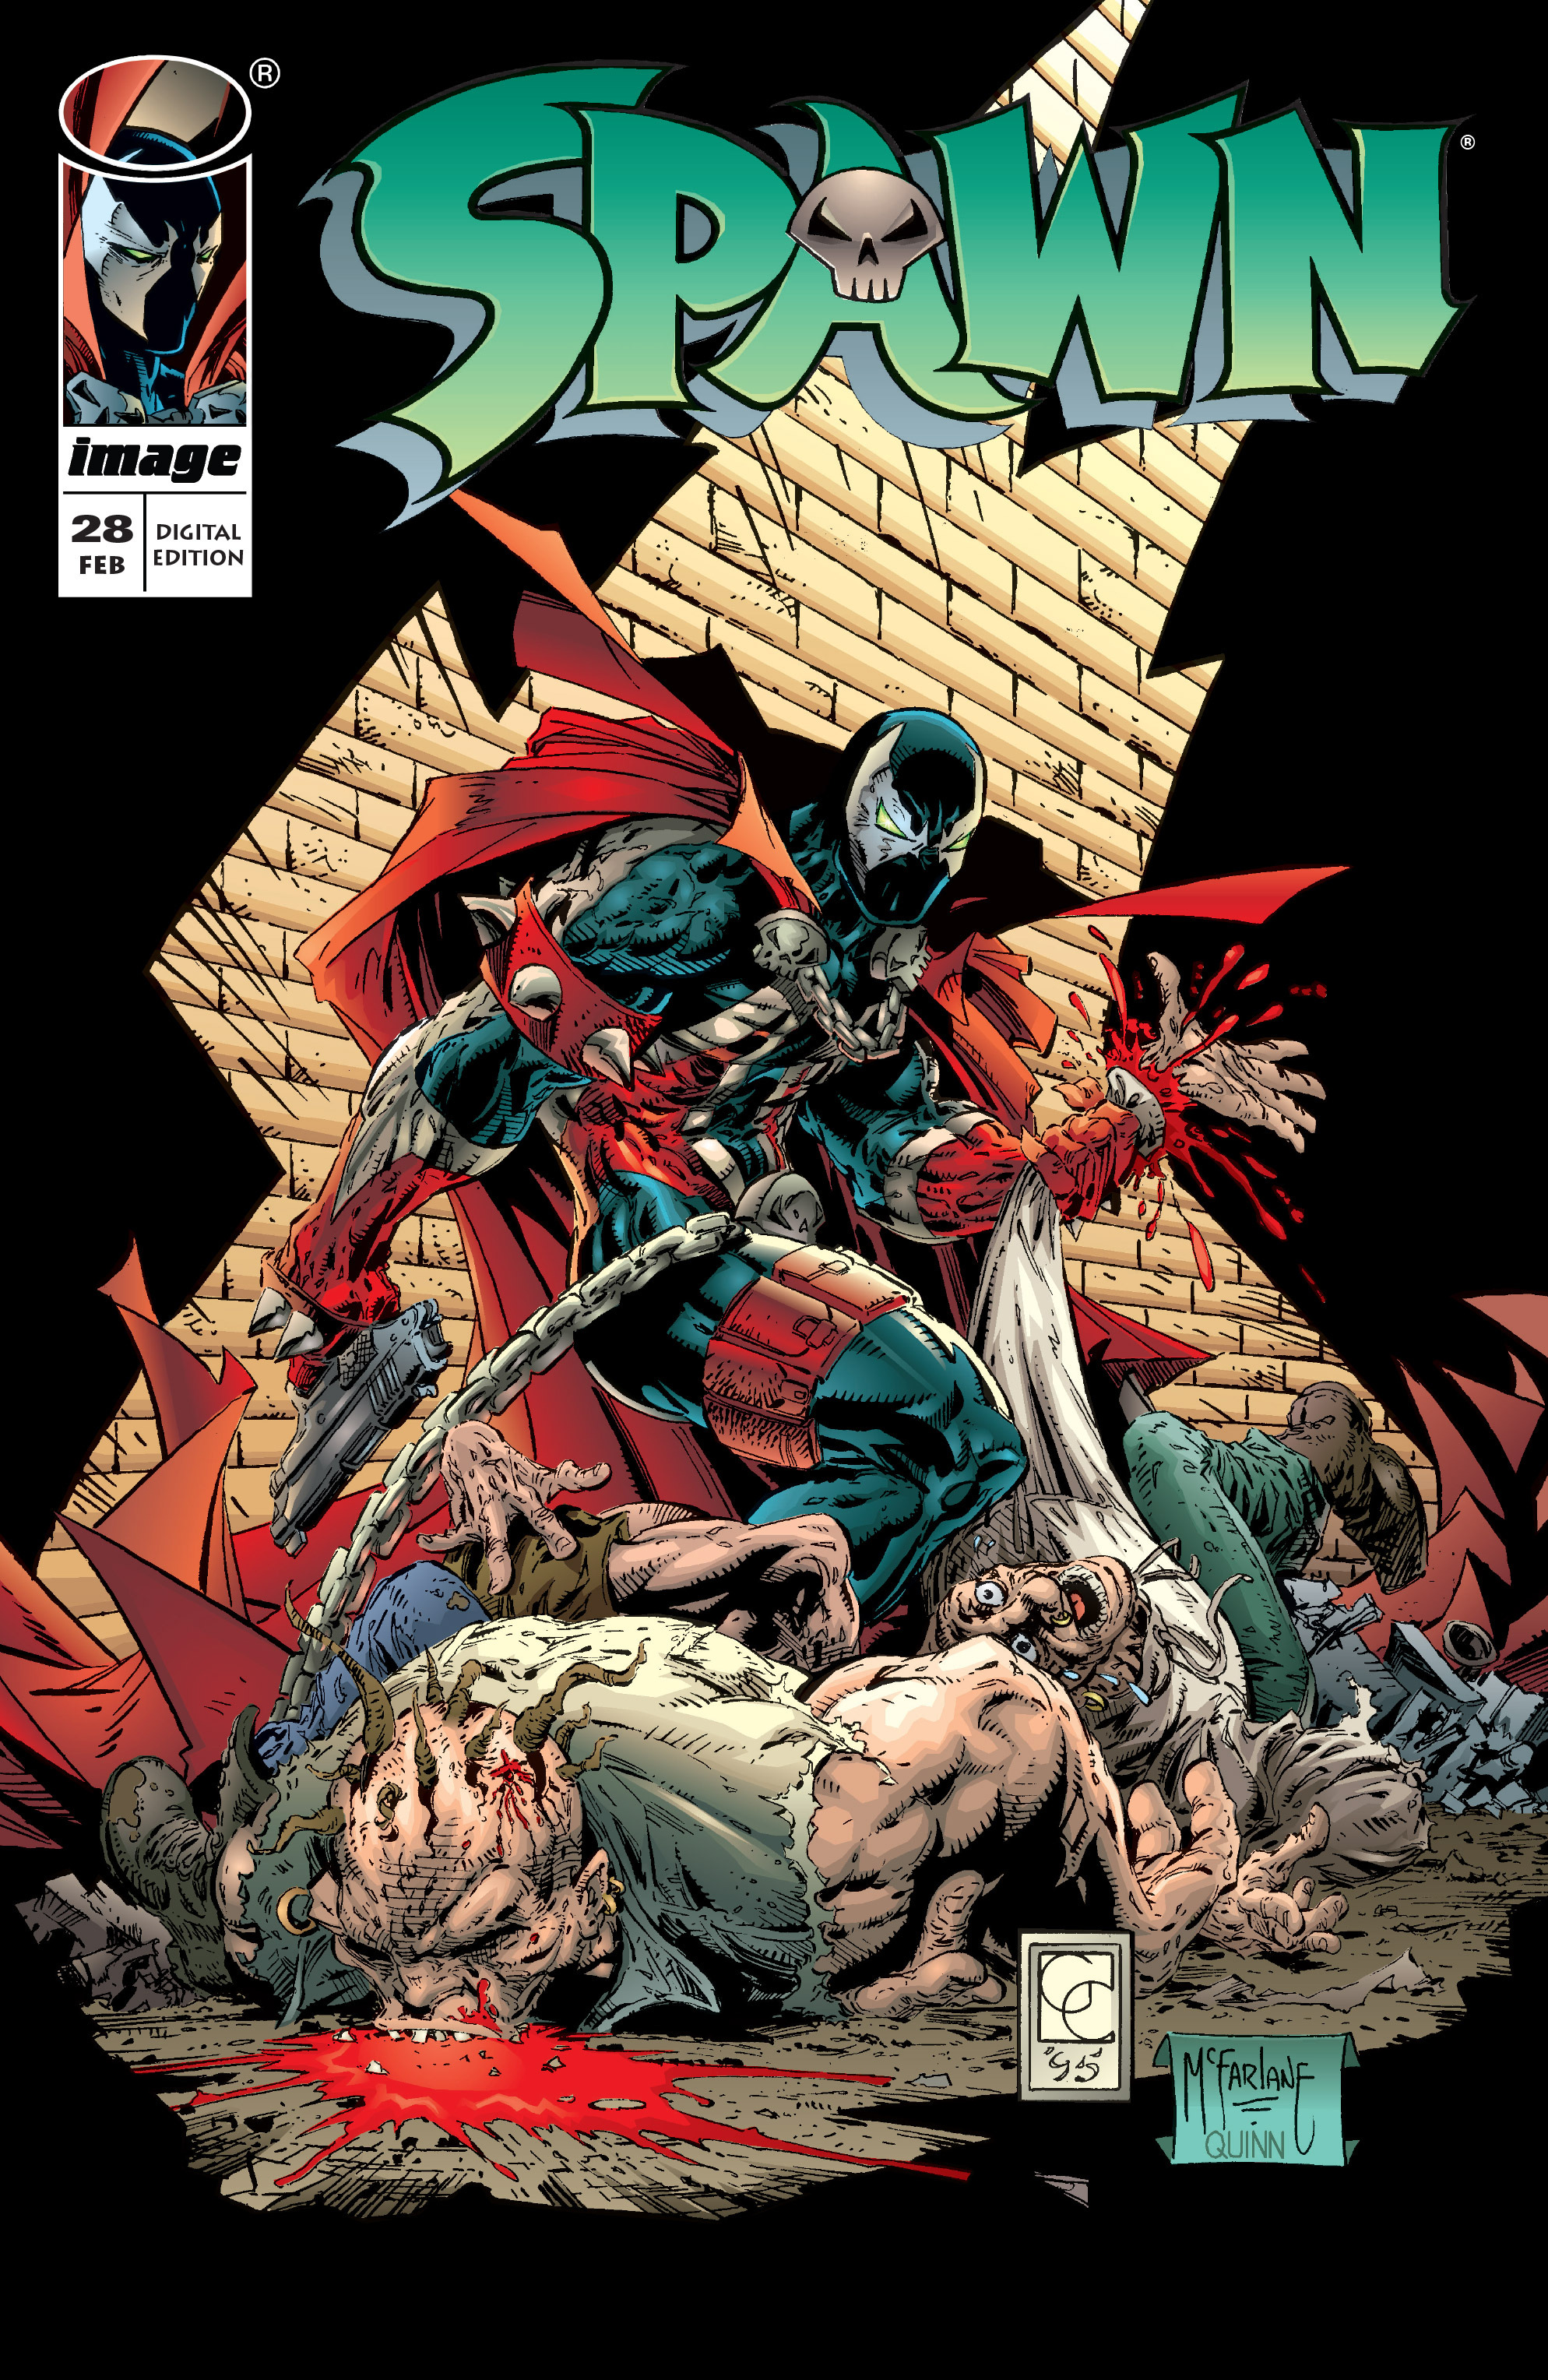 Read online Spawn comic -  Issue #28 - 1